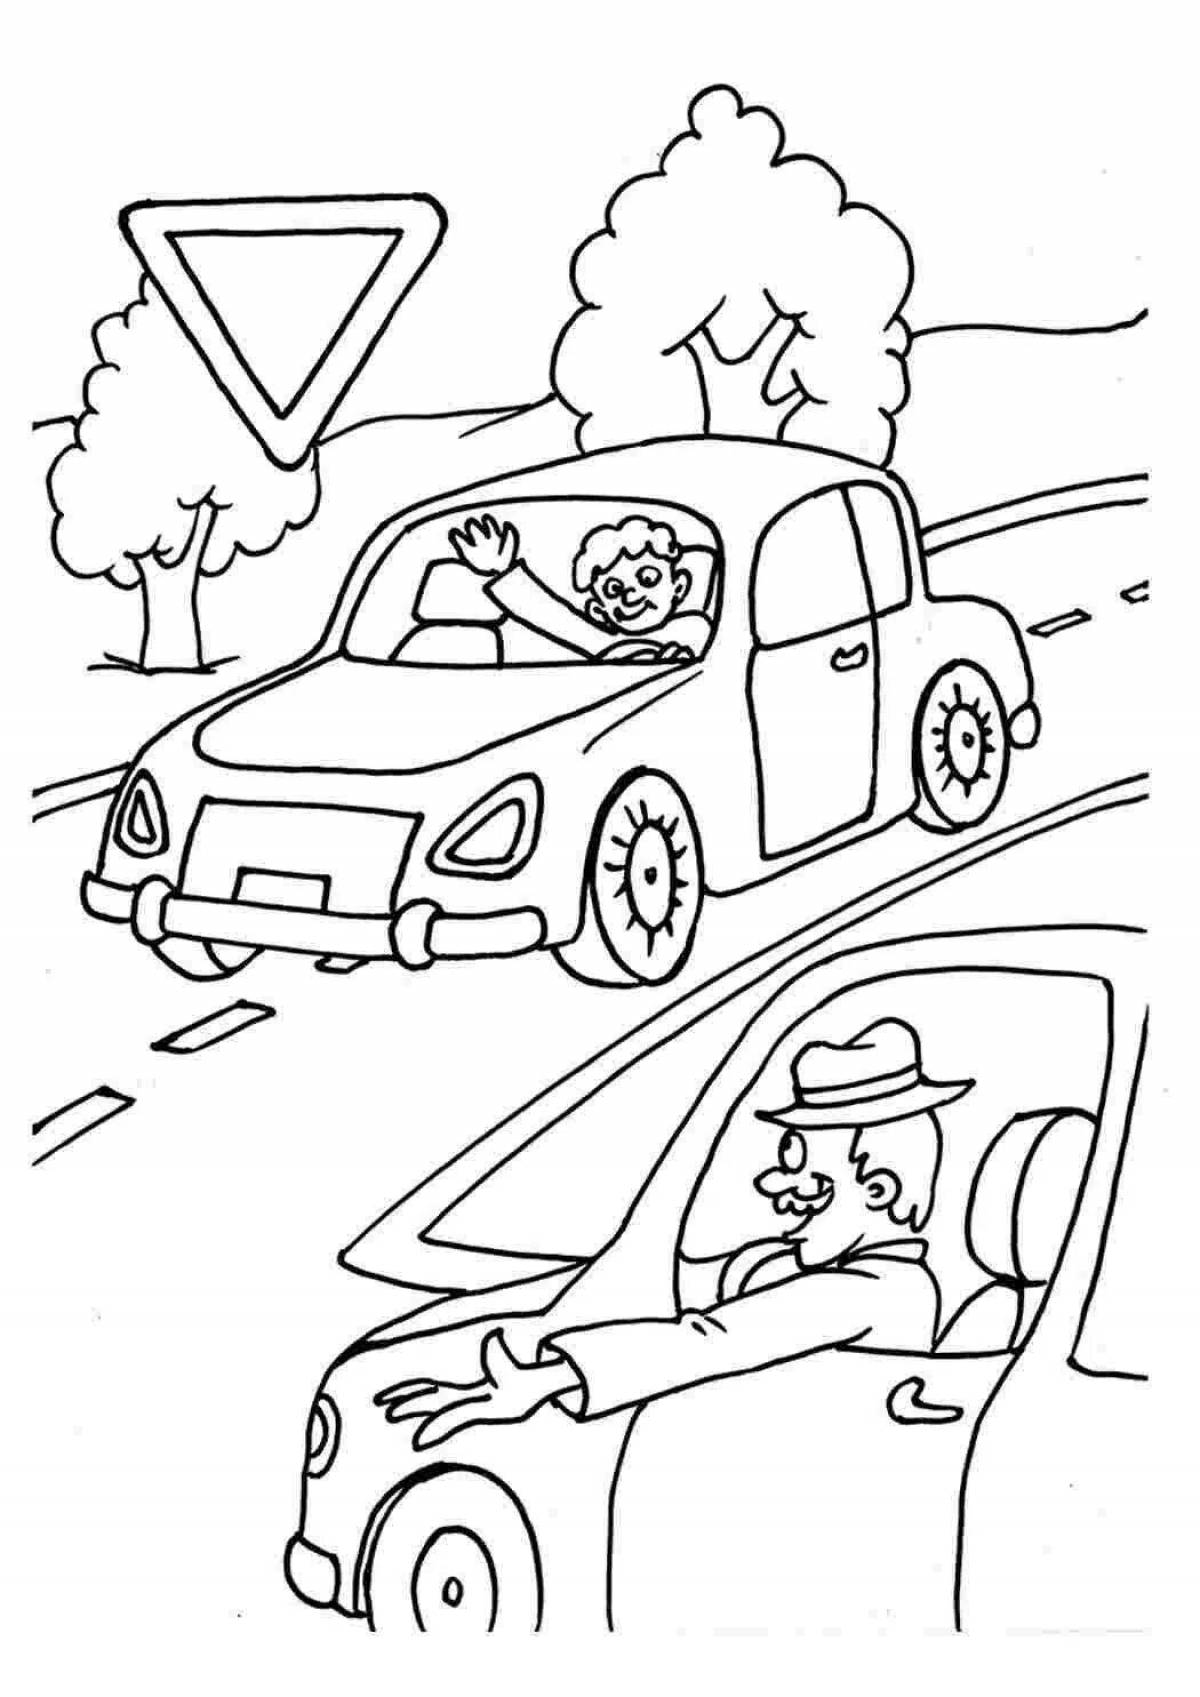 Radiant coloring page traffic rules in winter on the road